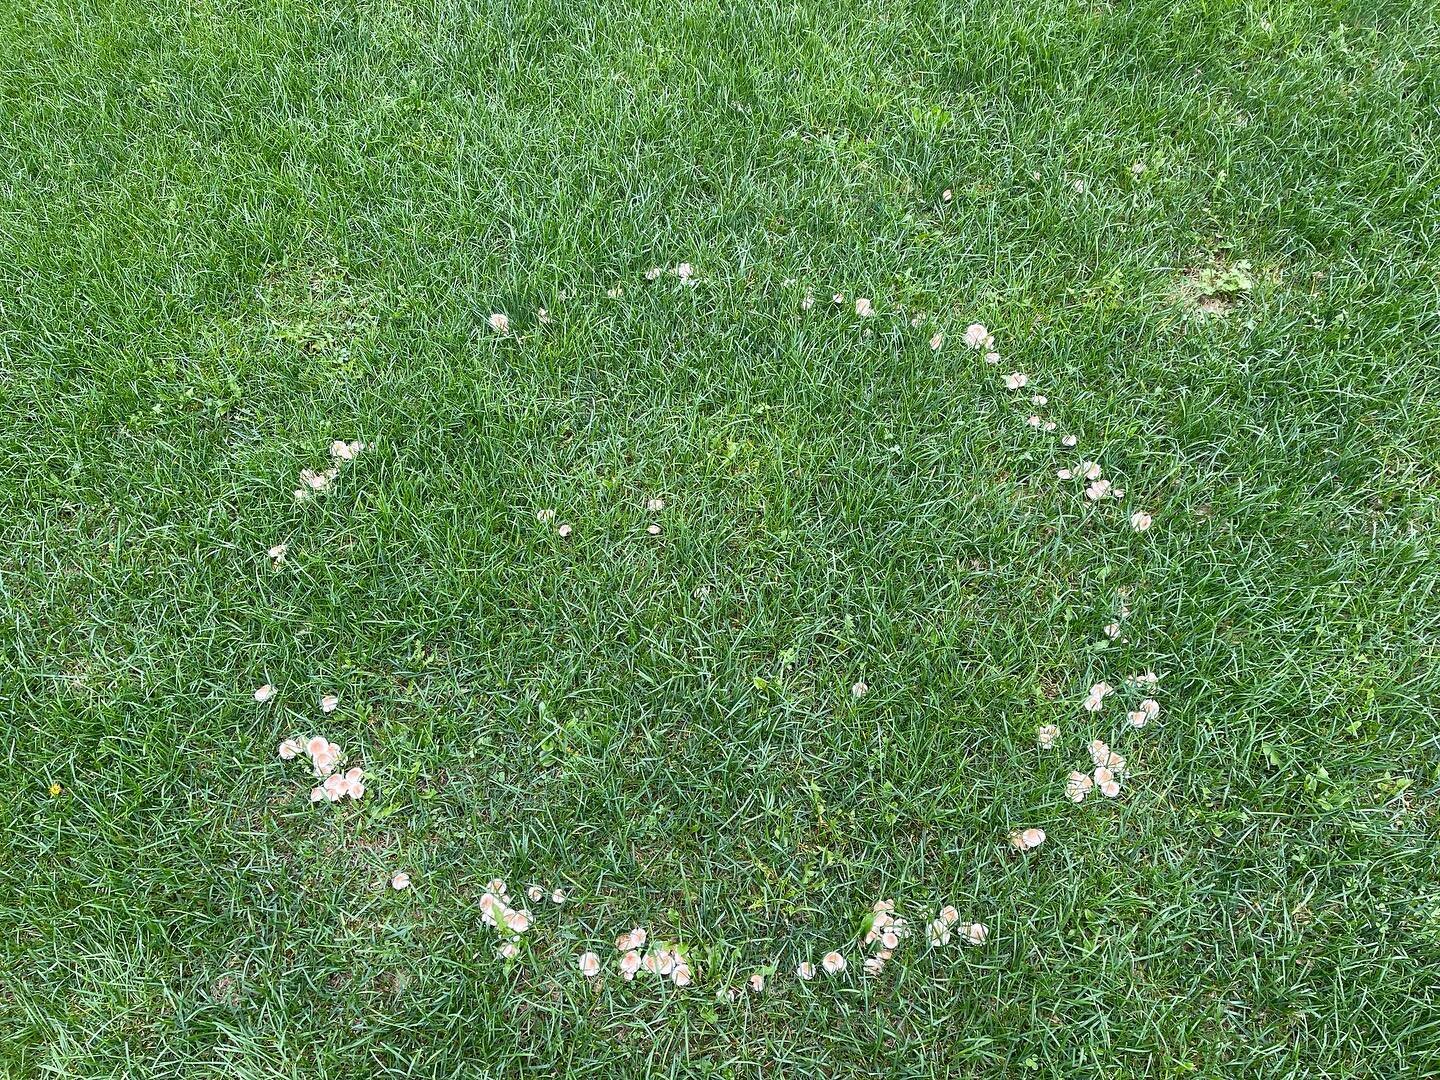 Umm, is there a fungal version of a crop circle? Because these mushrooms in my yard feel like they&rsquo;re straight out of an M. Night Shyamalan movie. 🍄👽🛸
#naturegifts